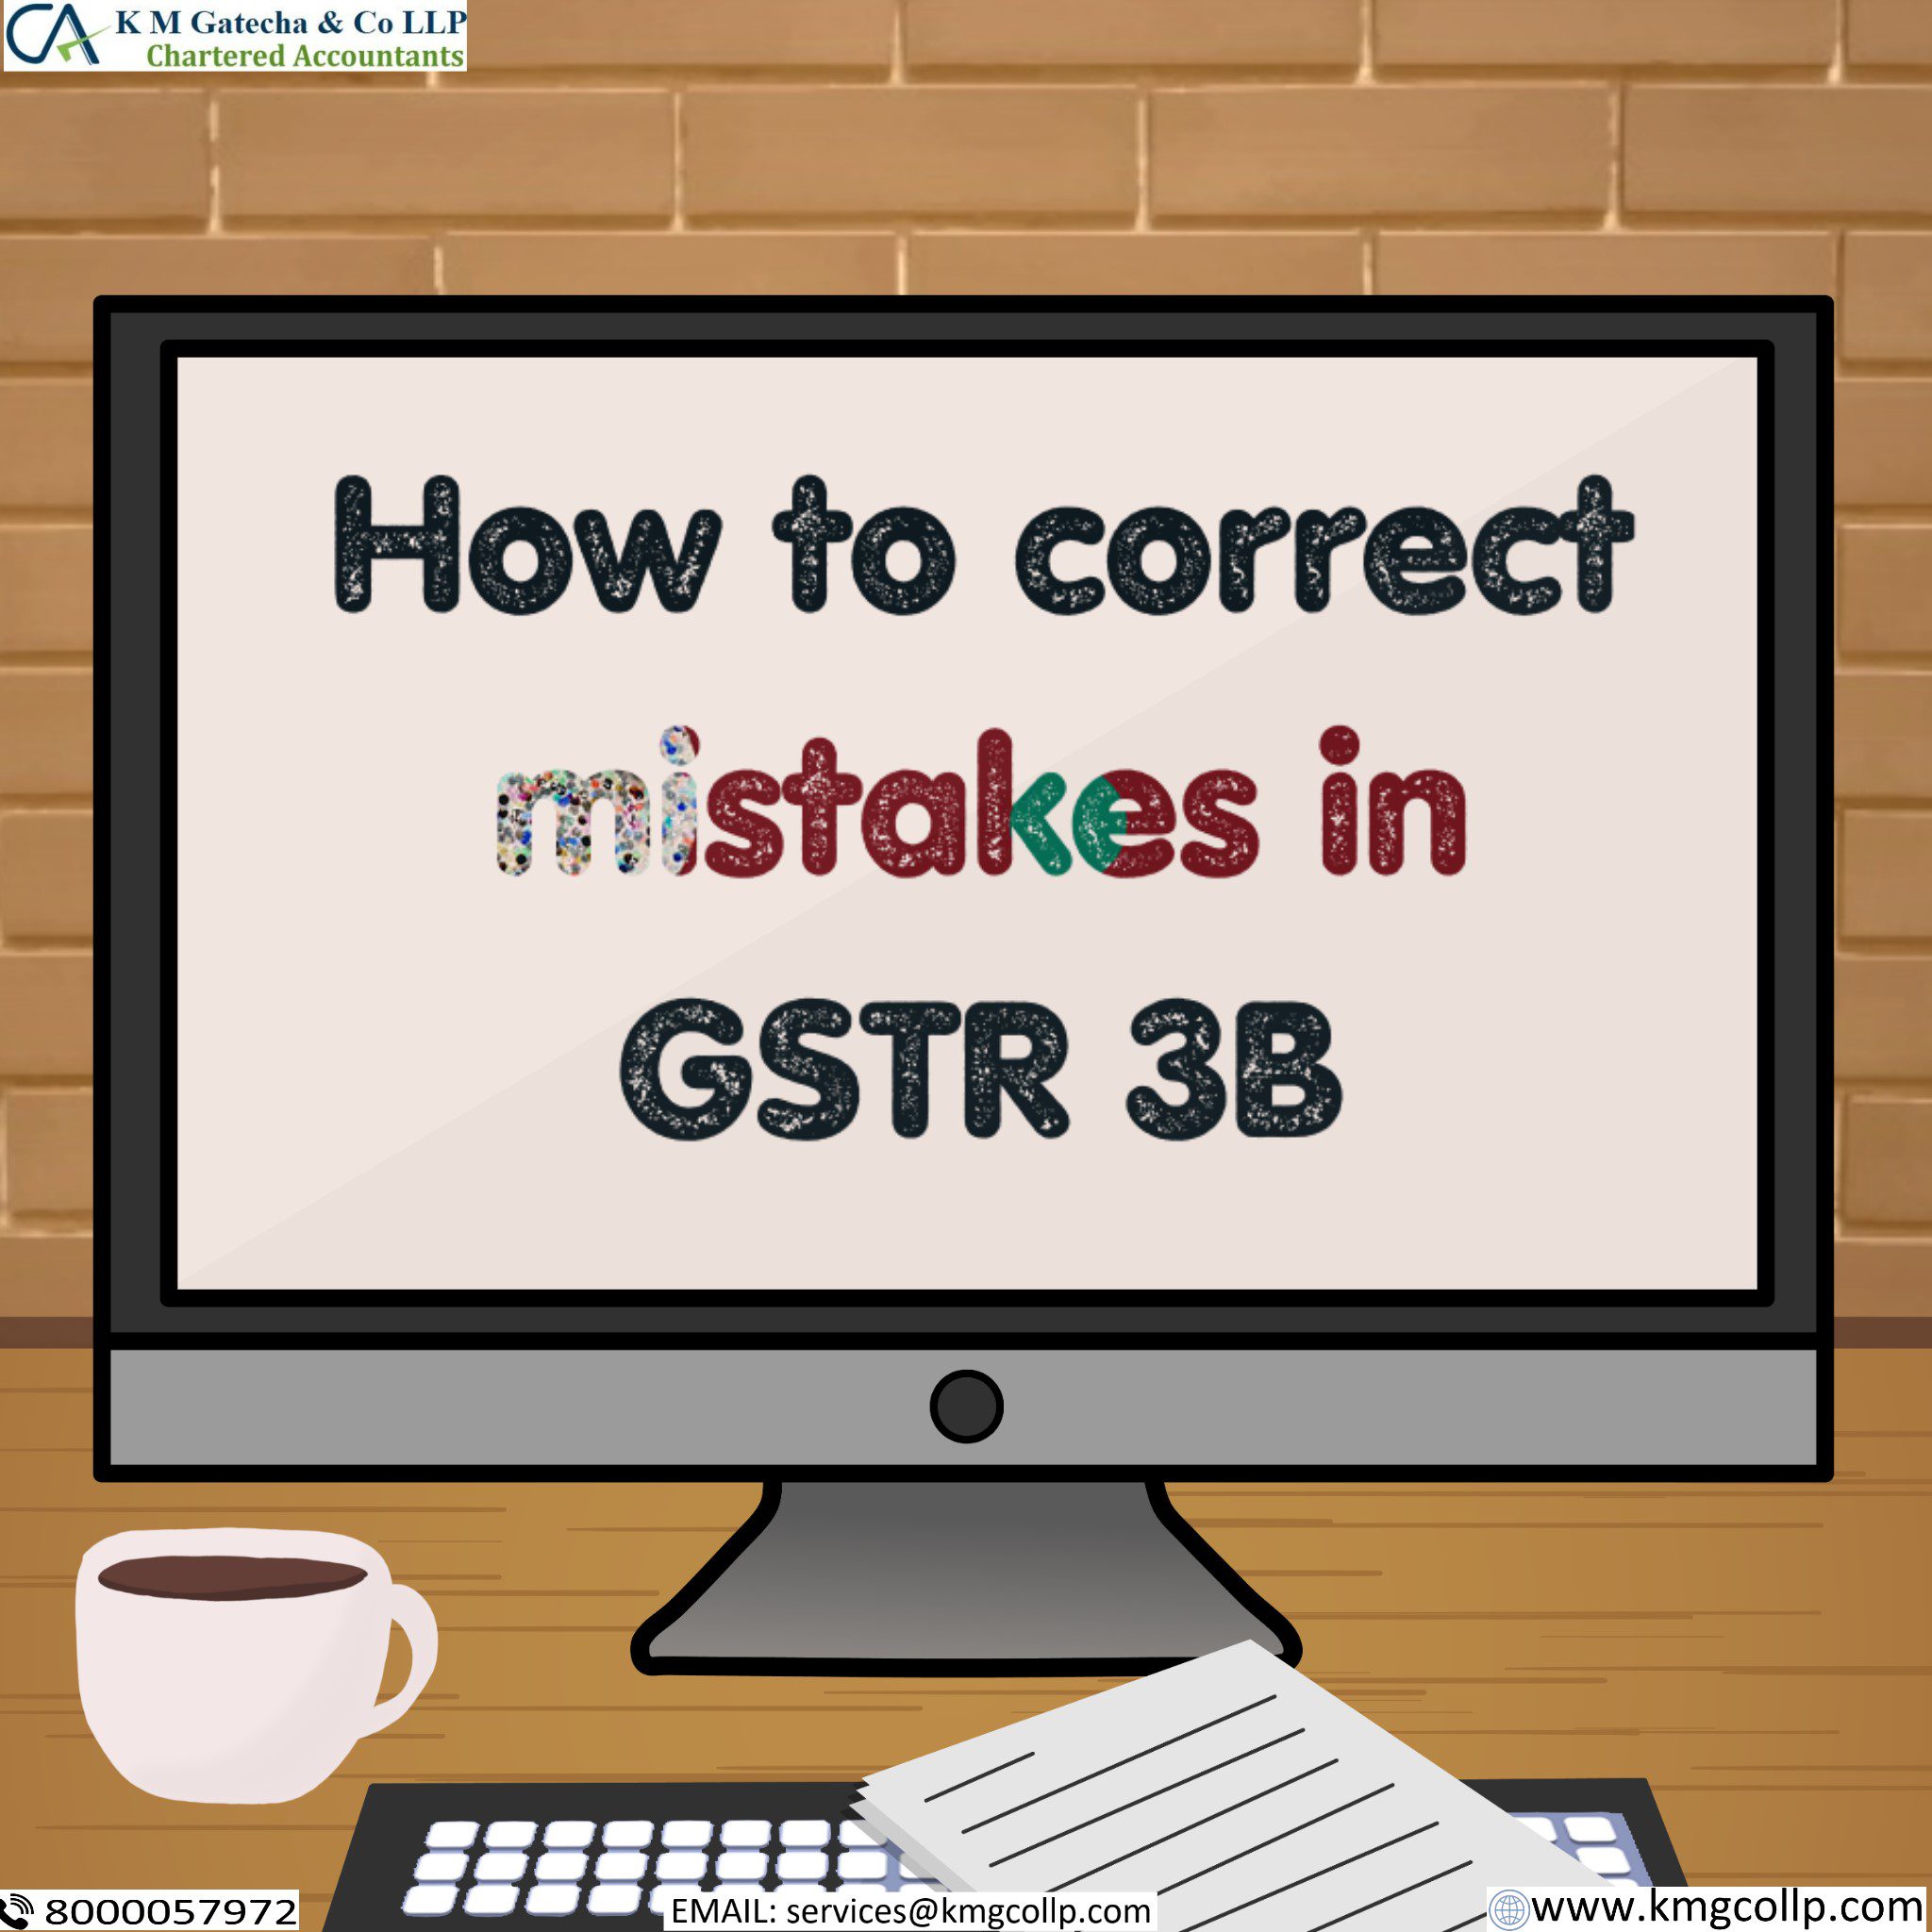 Read more about the article How to correct mistakes in GSTR 3B